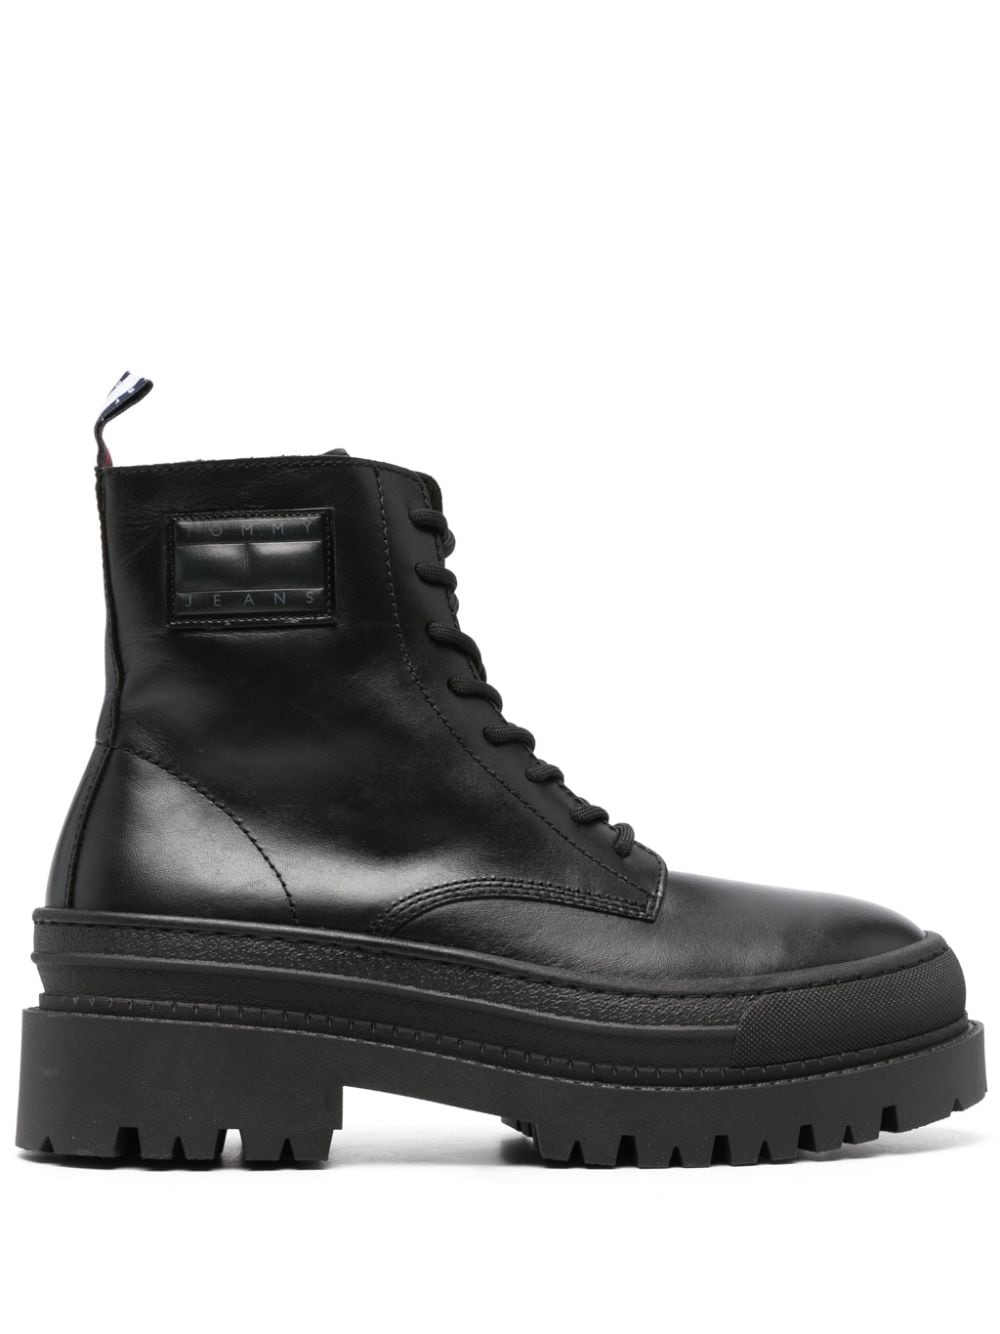 Foxing lace-up leather boots